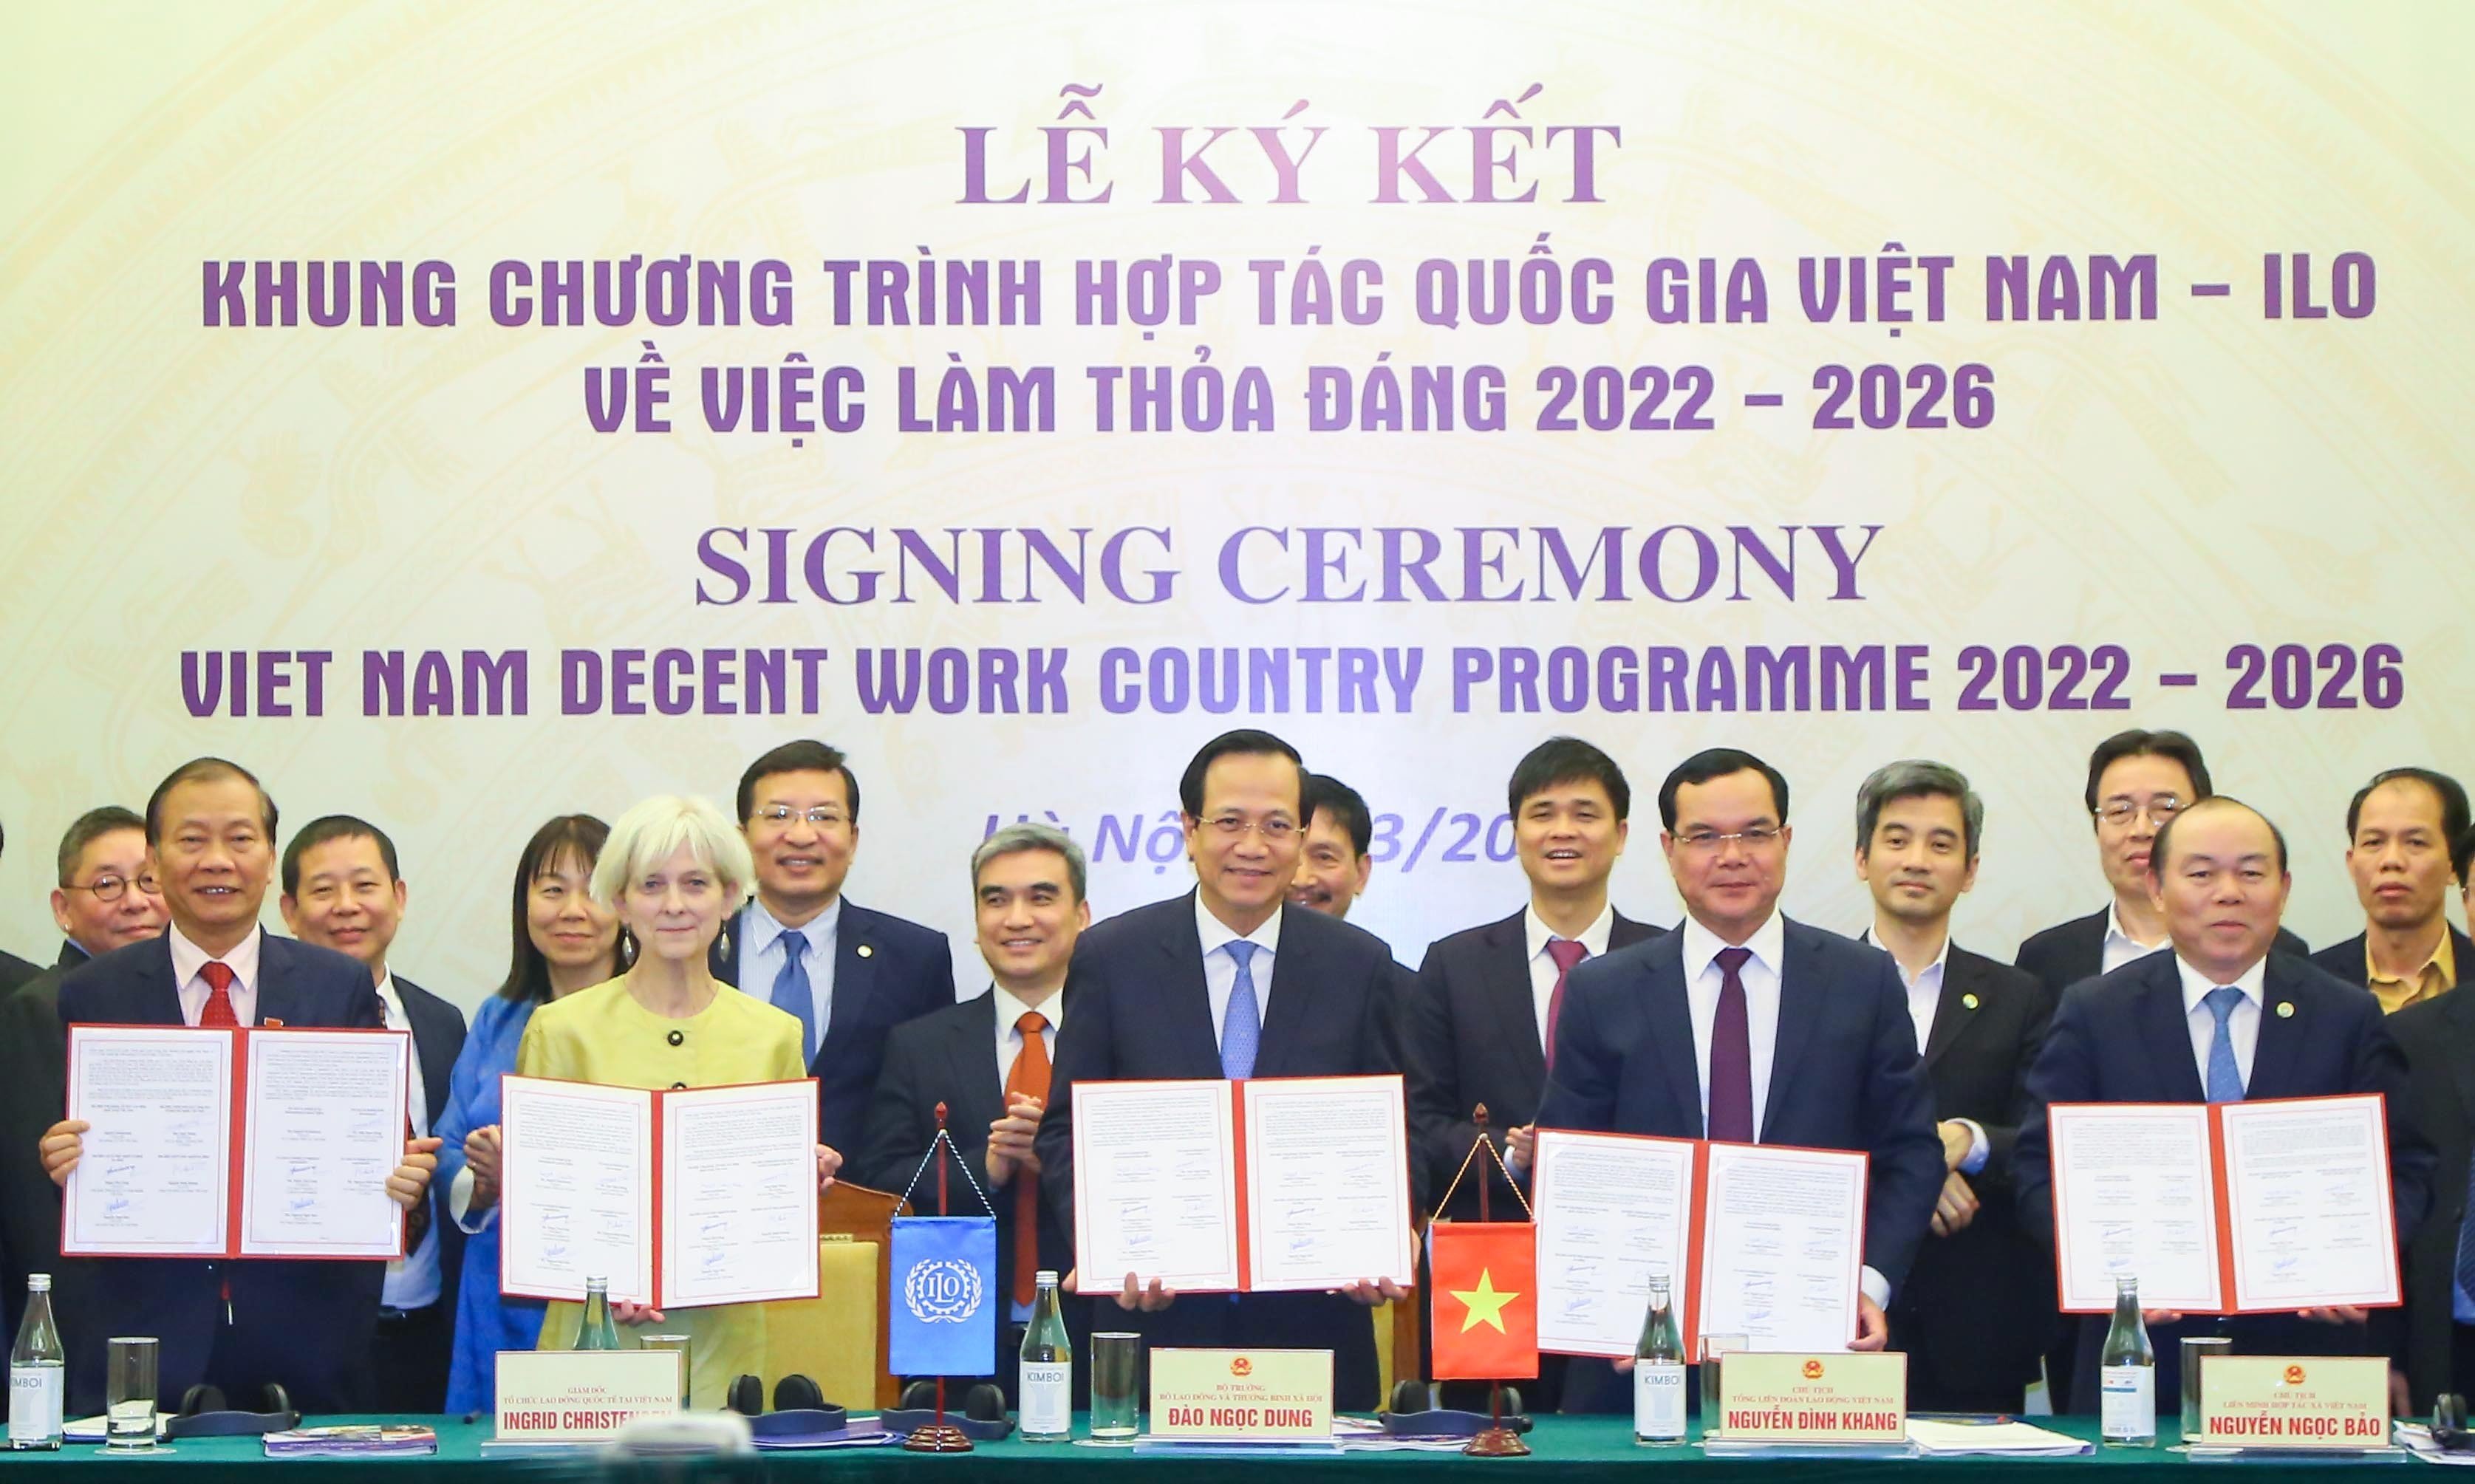 The signing ceremony of Vietnam Decent Work Country Programme 2022 -2026